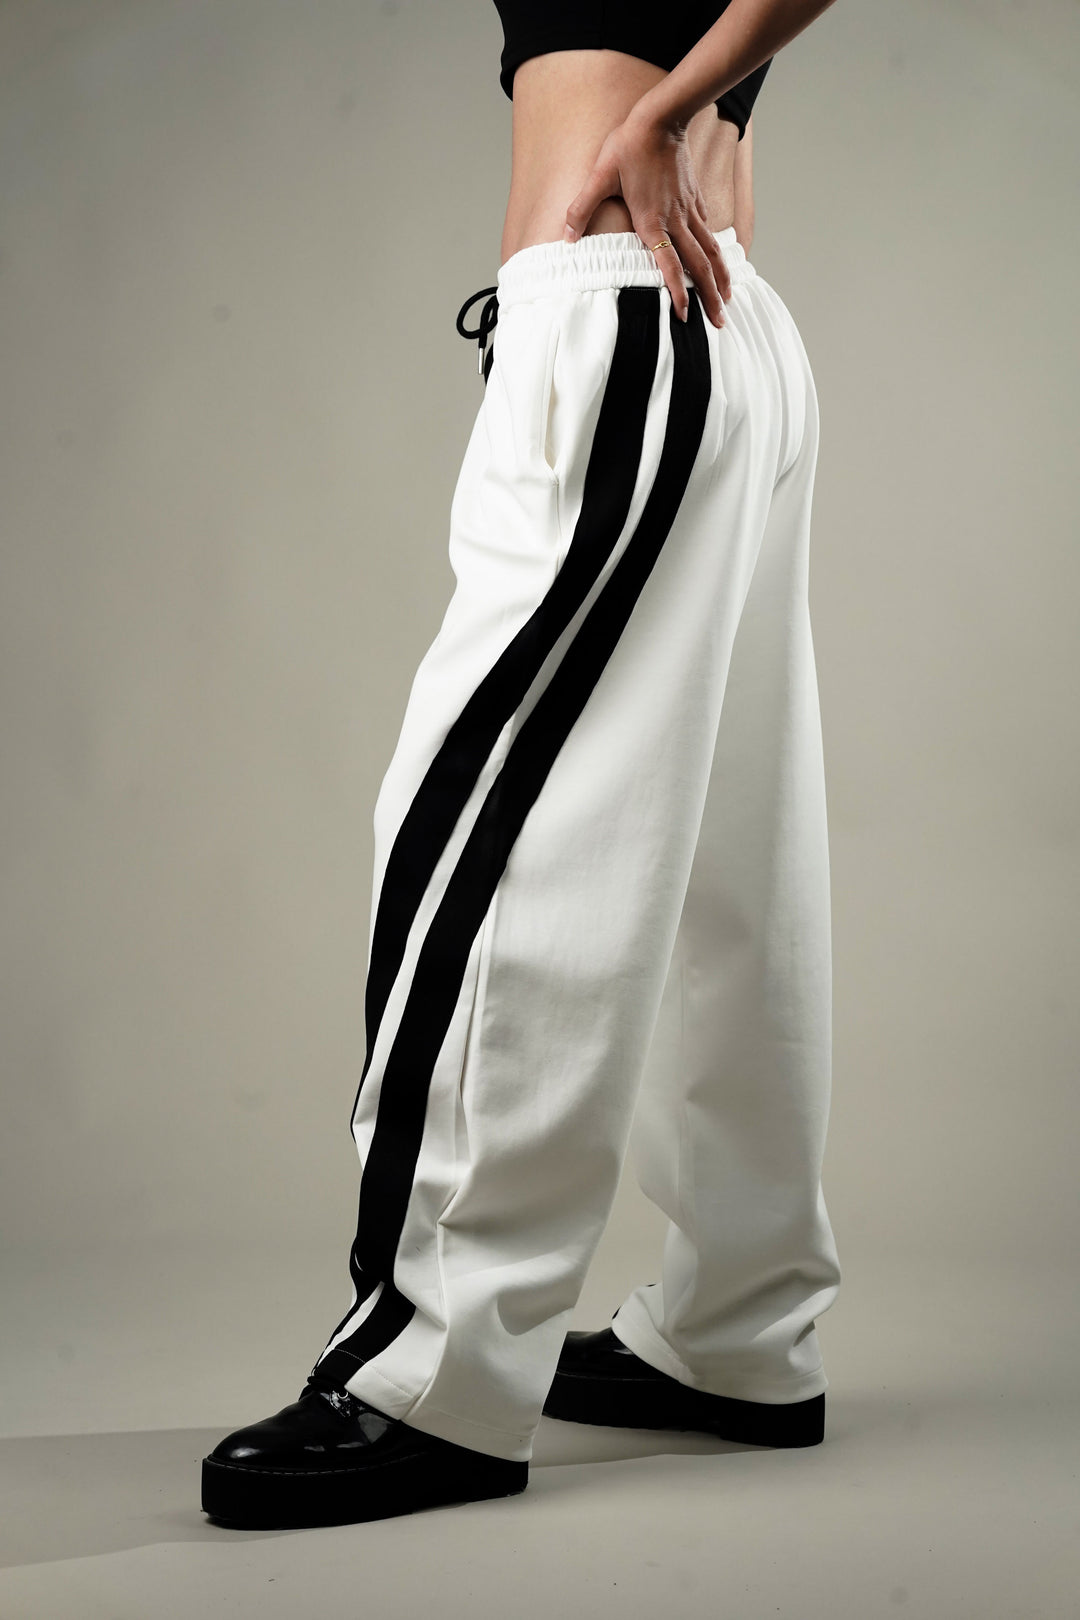 Women's white trousers for casual wear